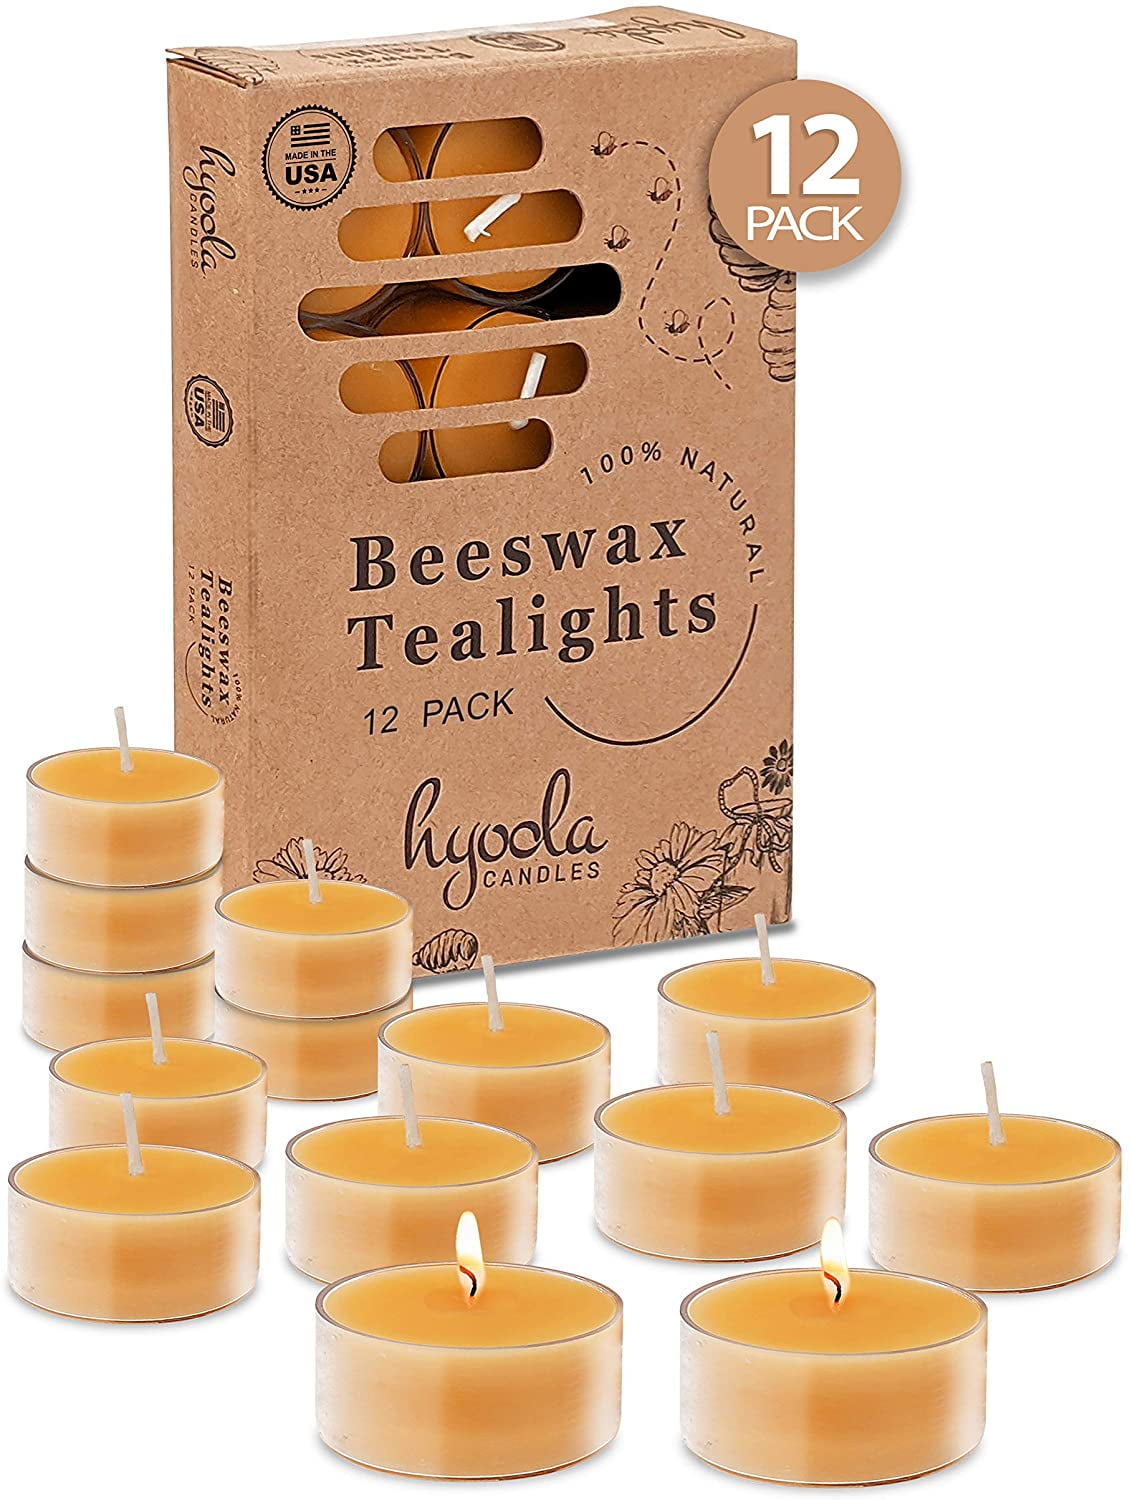 Aluminum Cup 6 Natural Honey Scented Beeswax Tea Light Candles Cotton Wick